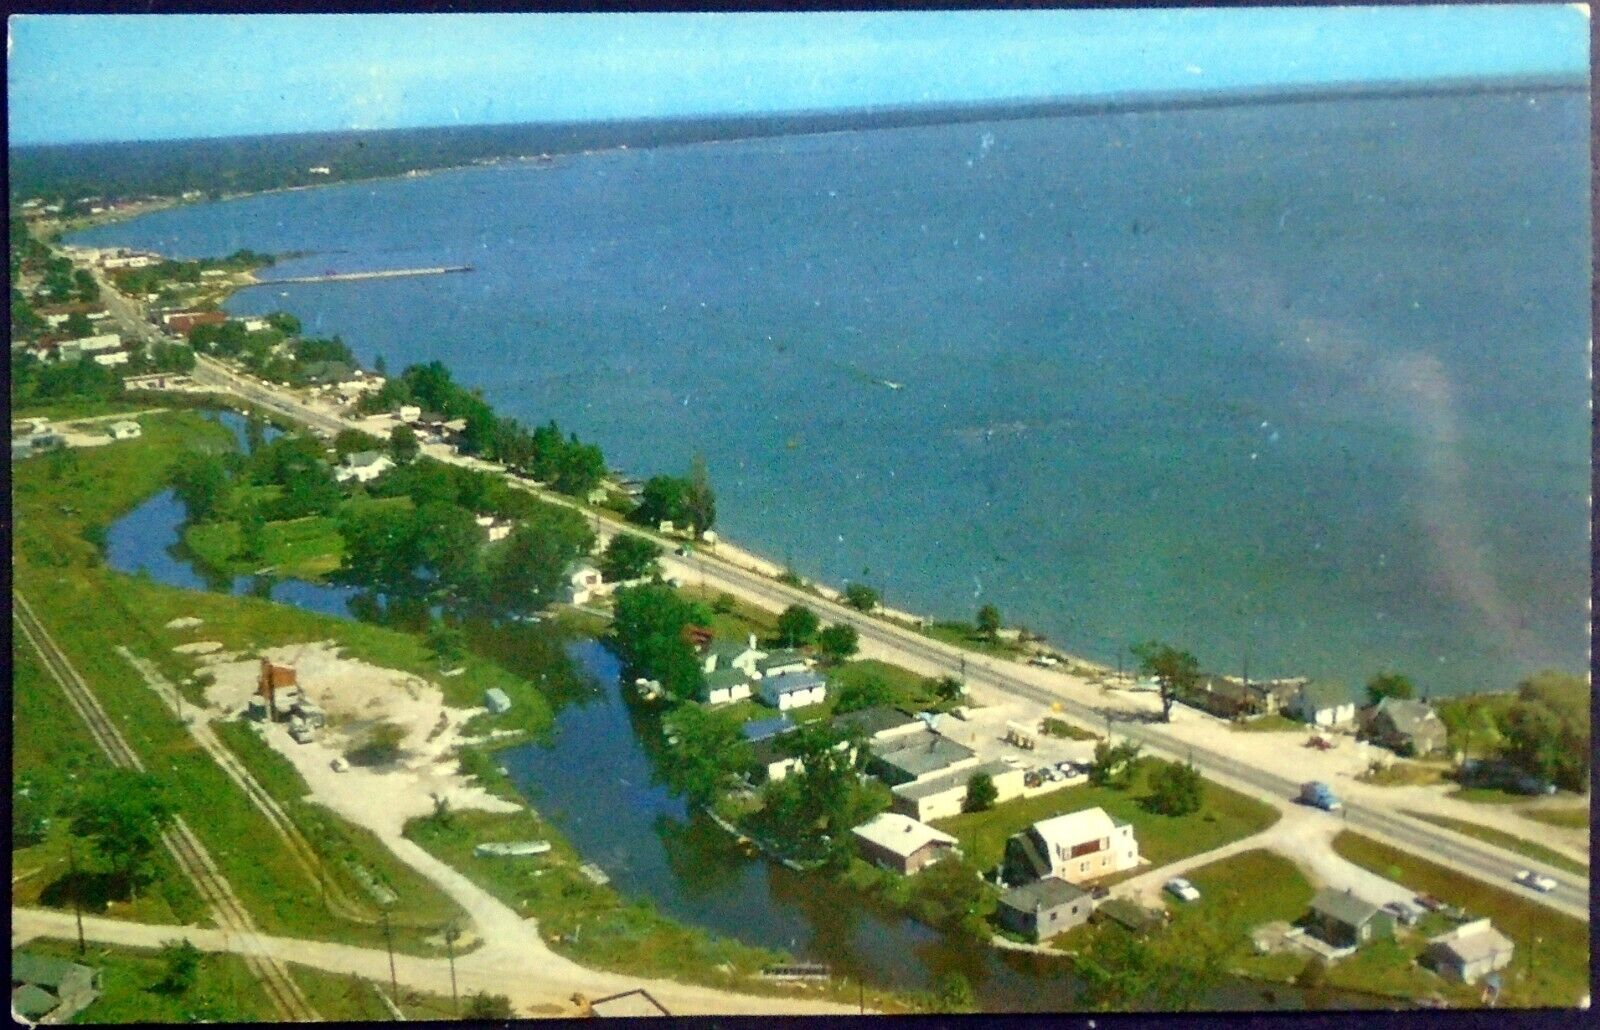 1961 Aerial View of U.S. 23 Scenic Highway and Tawas Bay, Michigan.